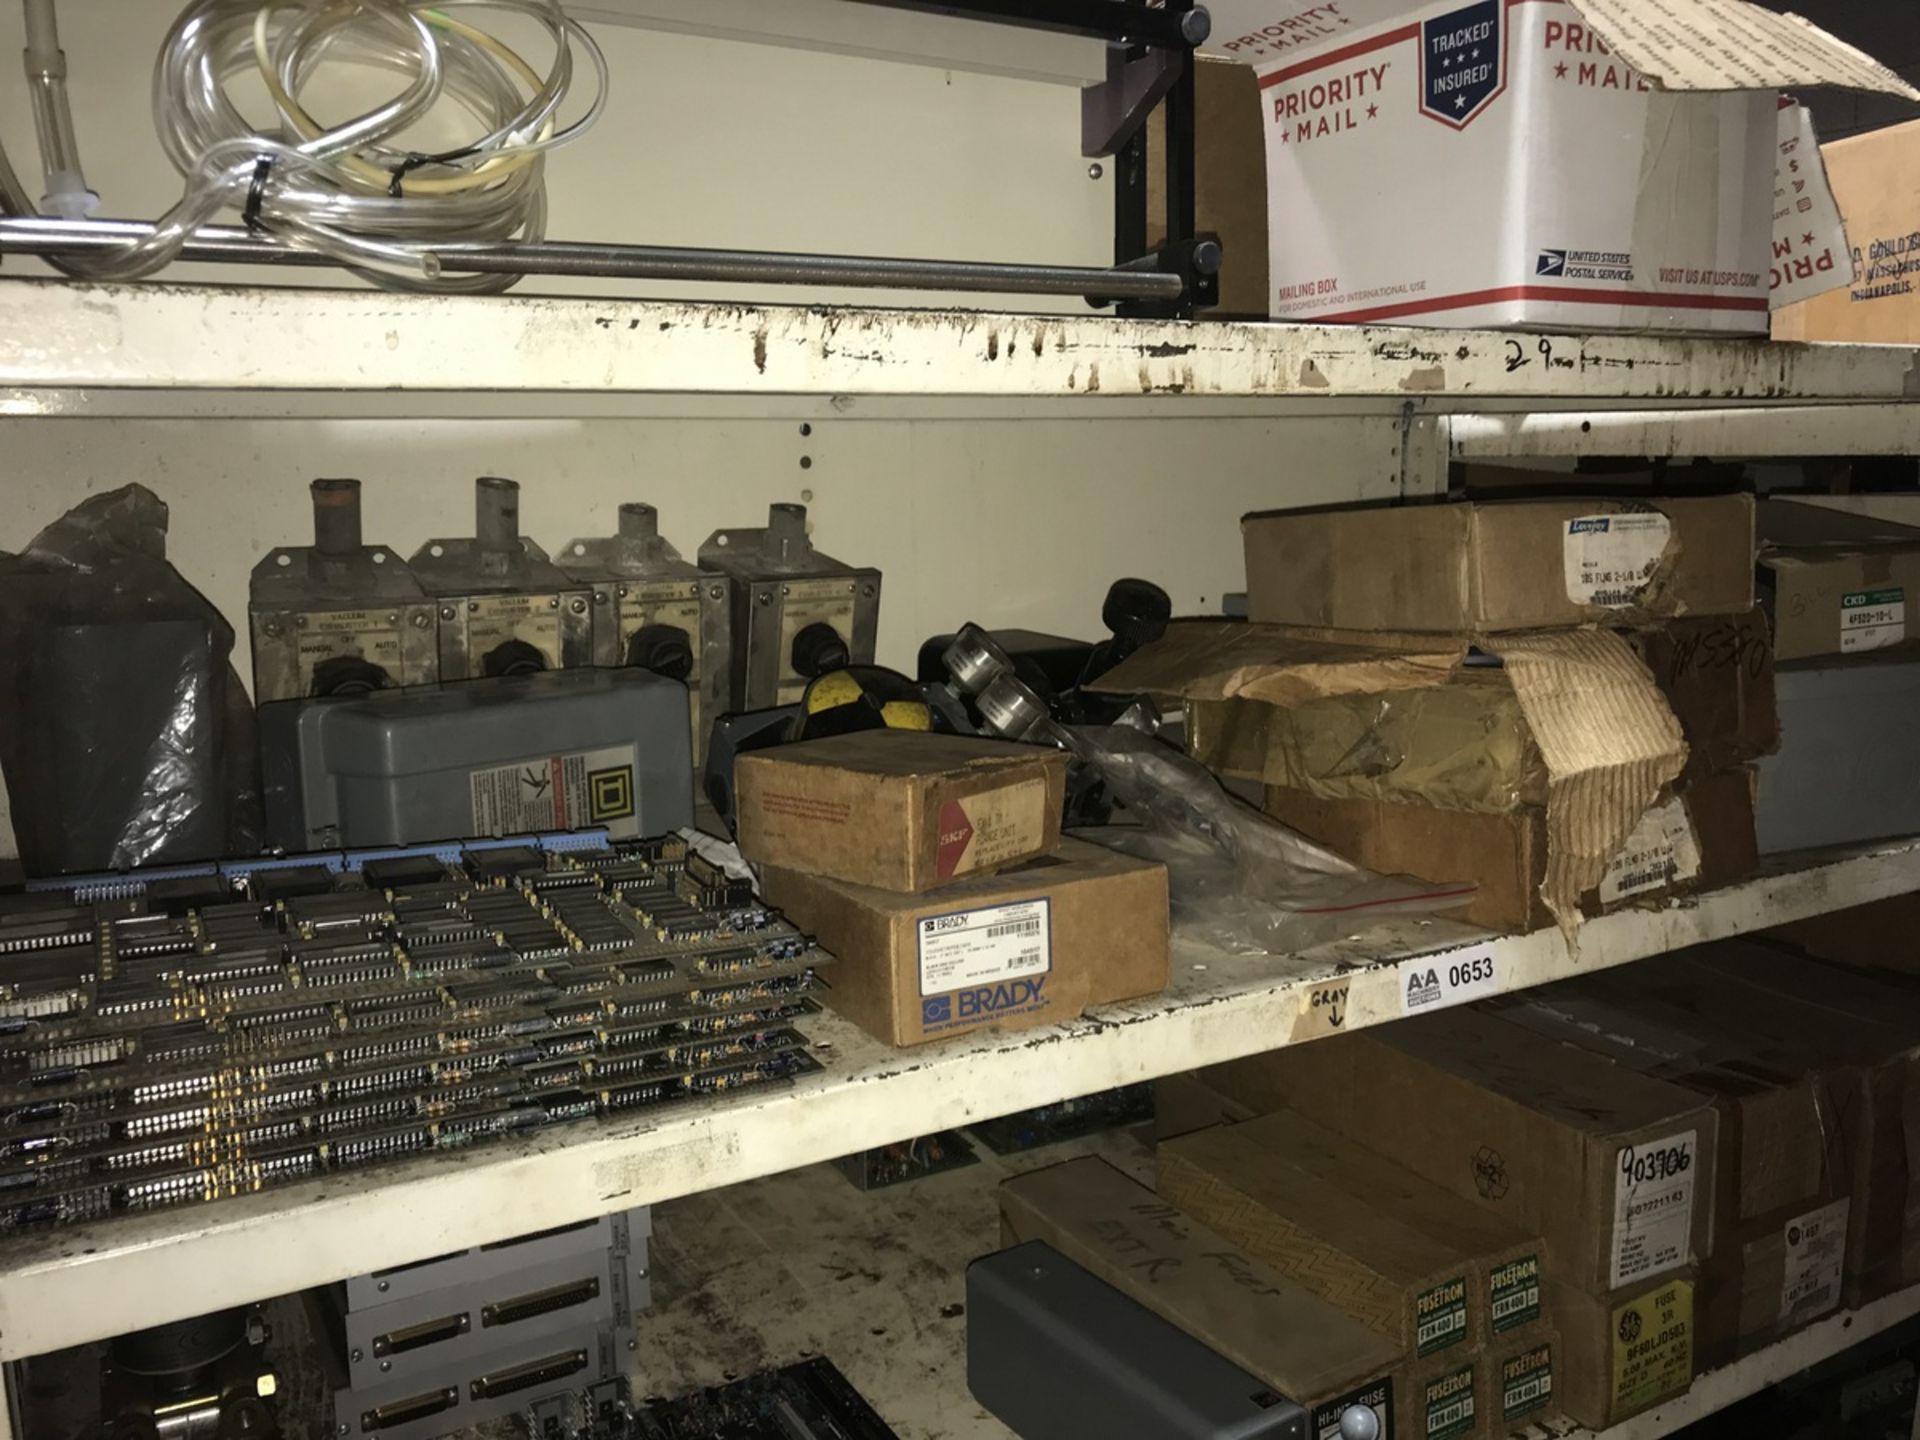 Contents of Shelf including switches, couplings, enclosures, boards, pneu positioner